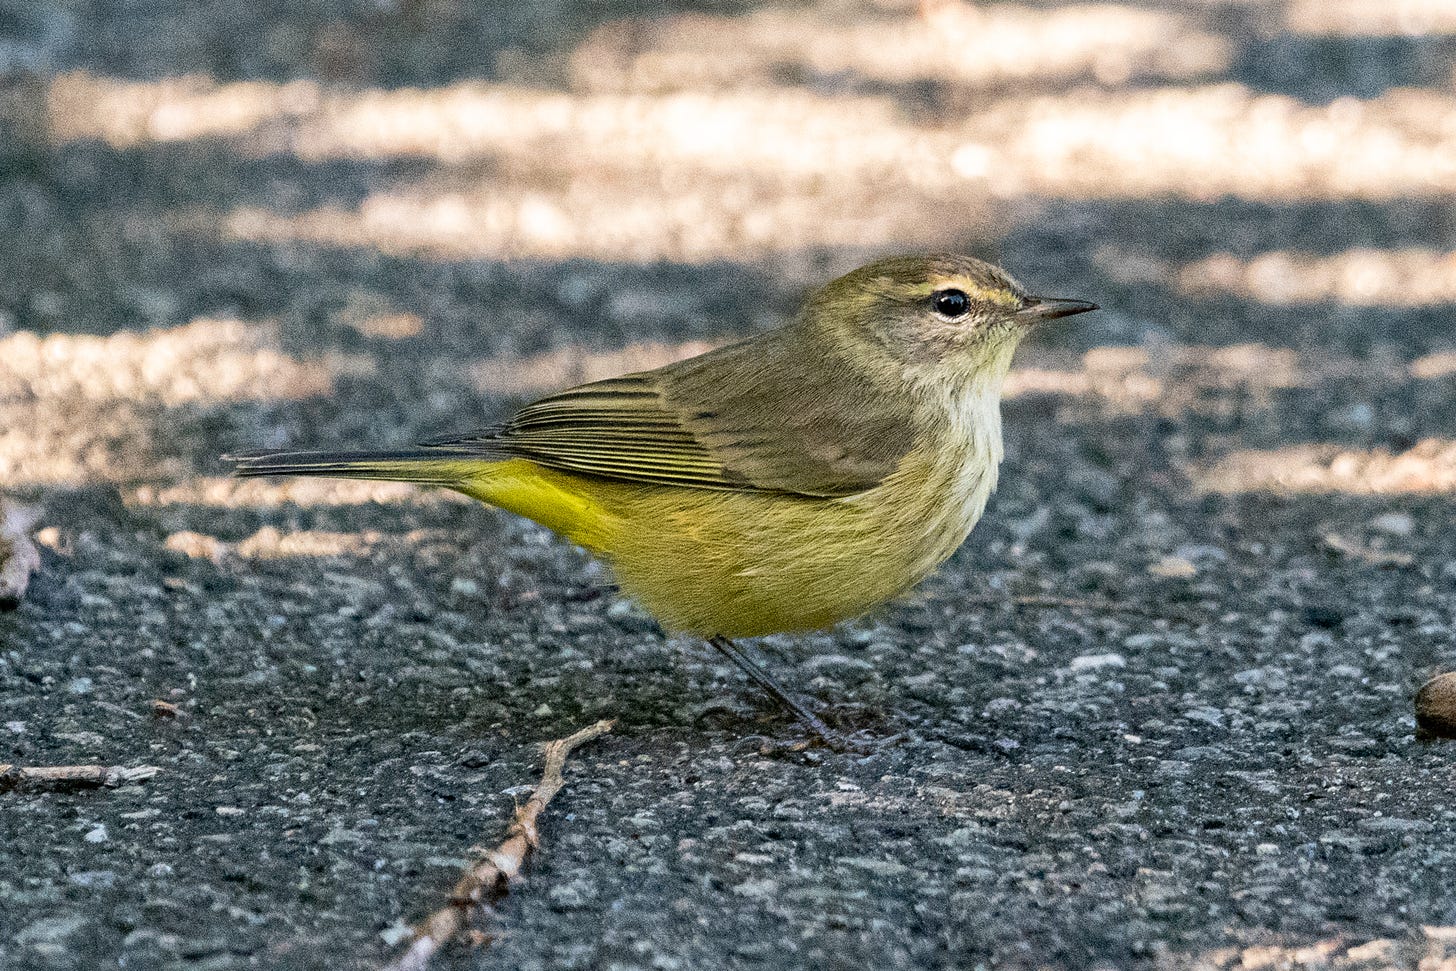 A small, dusty-looking bird, with a yellow stripe above its eye and a yellow underbelly, stands on a sidewalk pavement